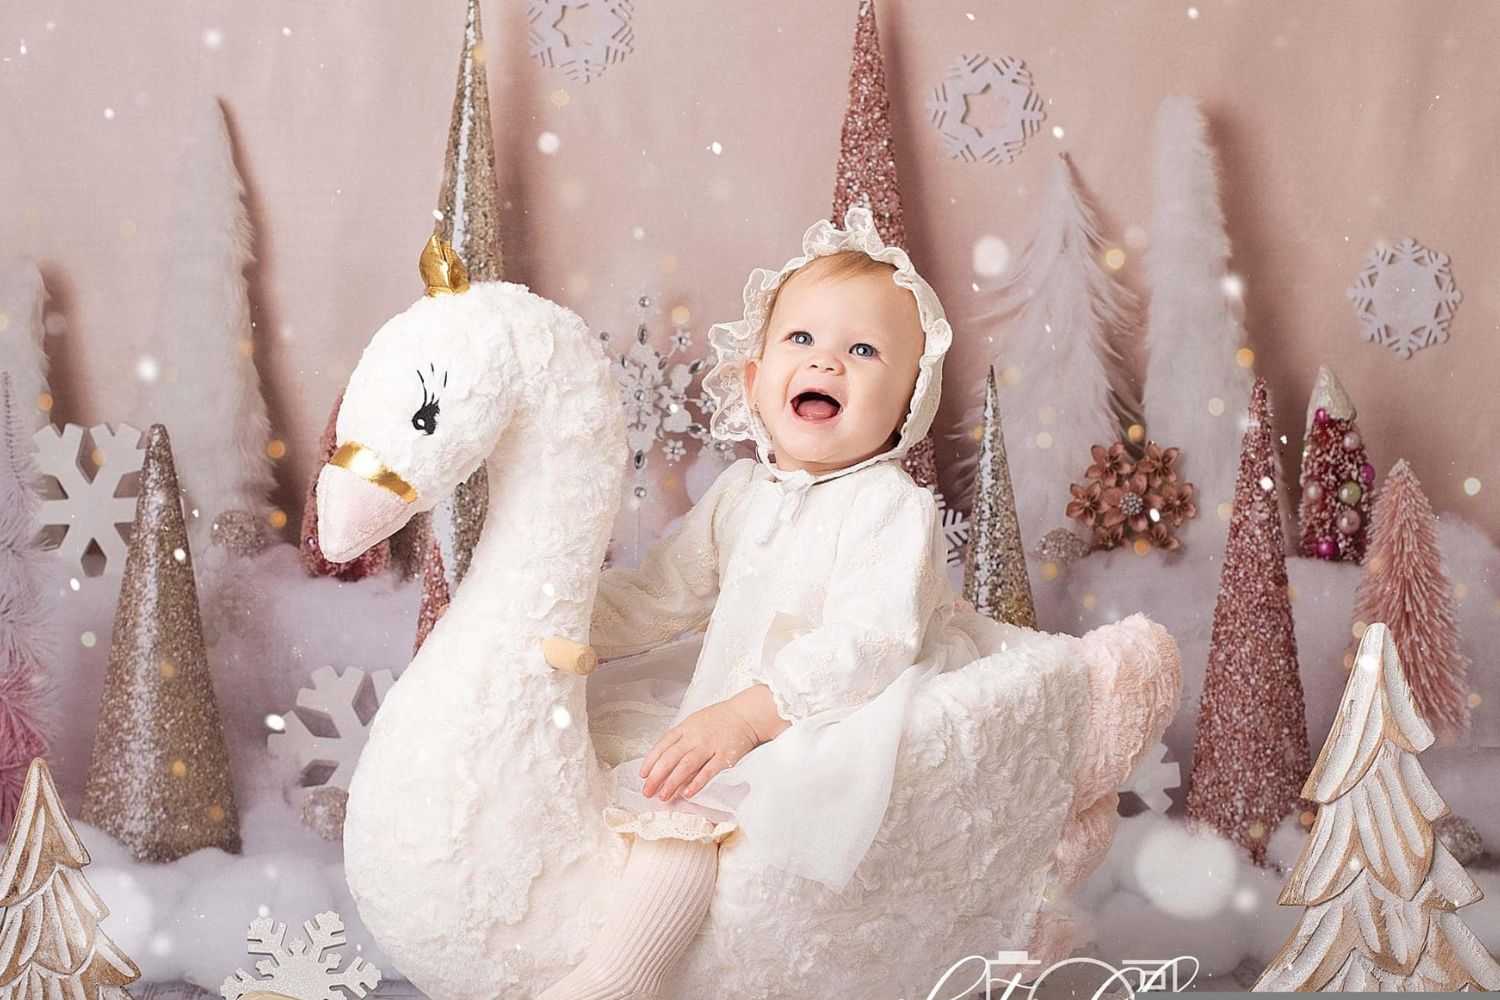 11 Practical  Super Easy Tips for Your Baby's First Christmas Photo S